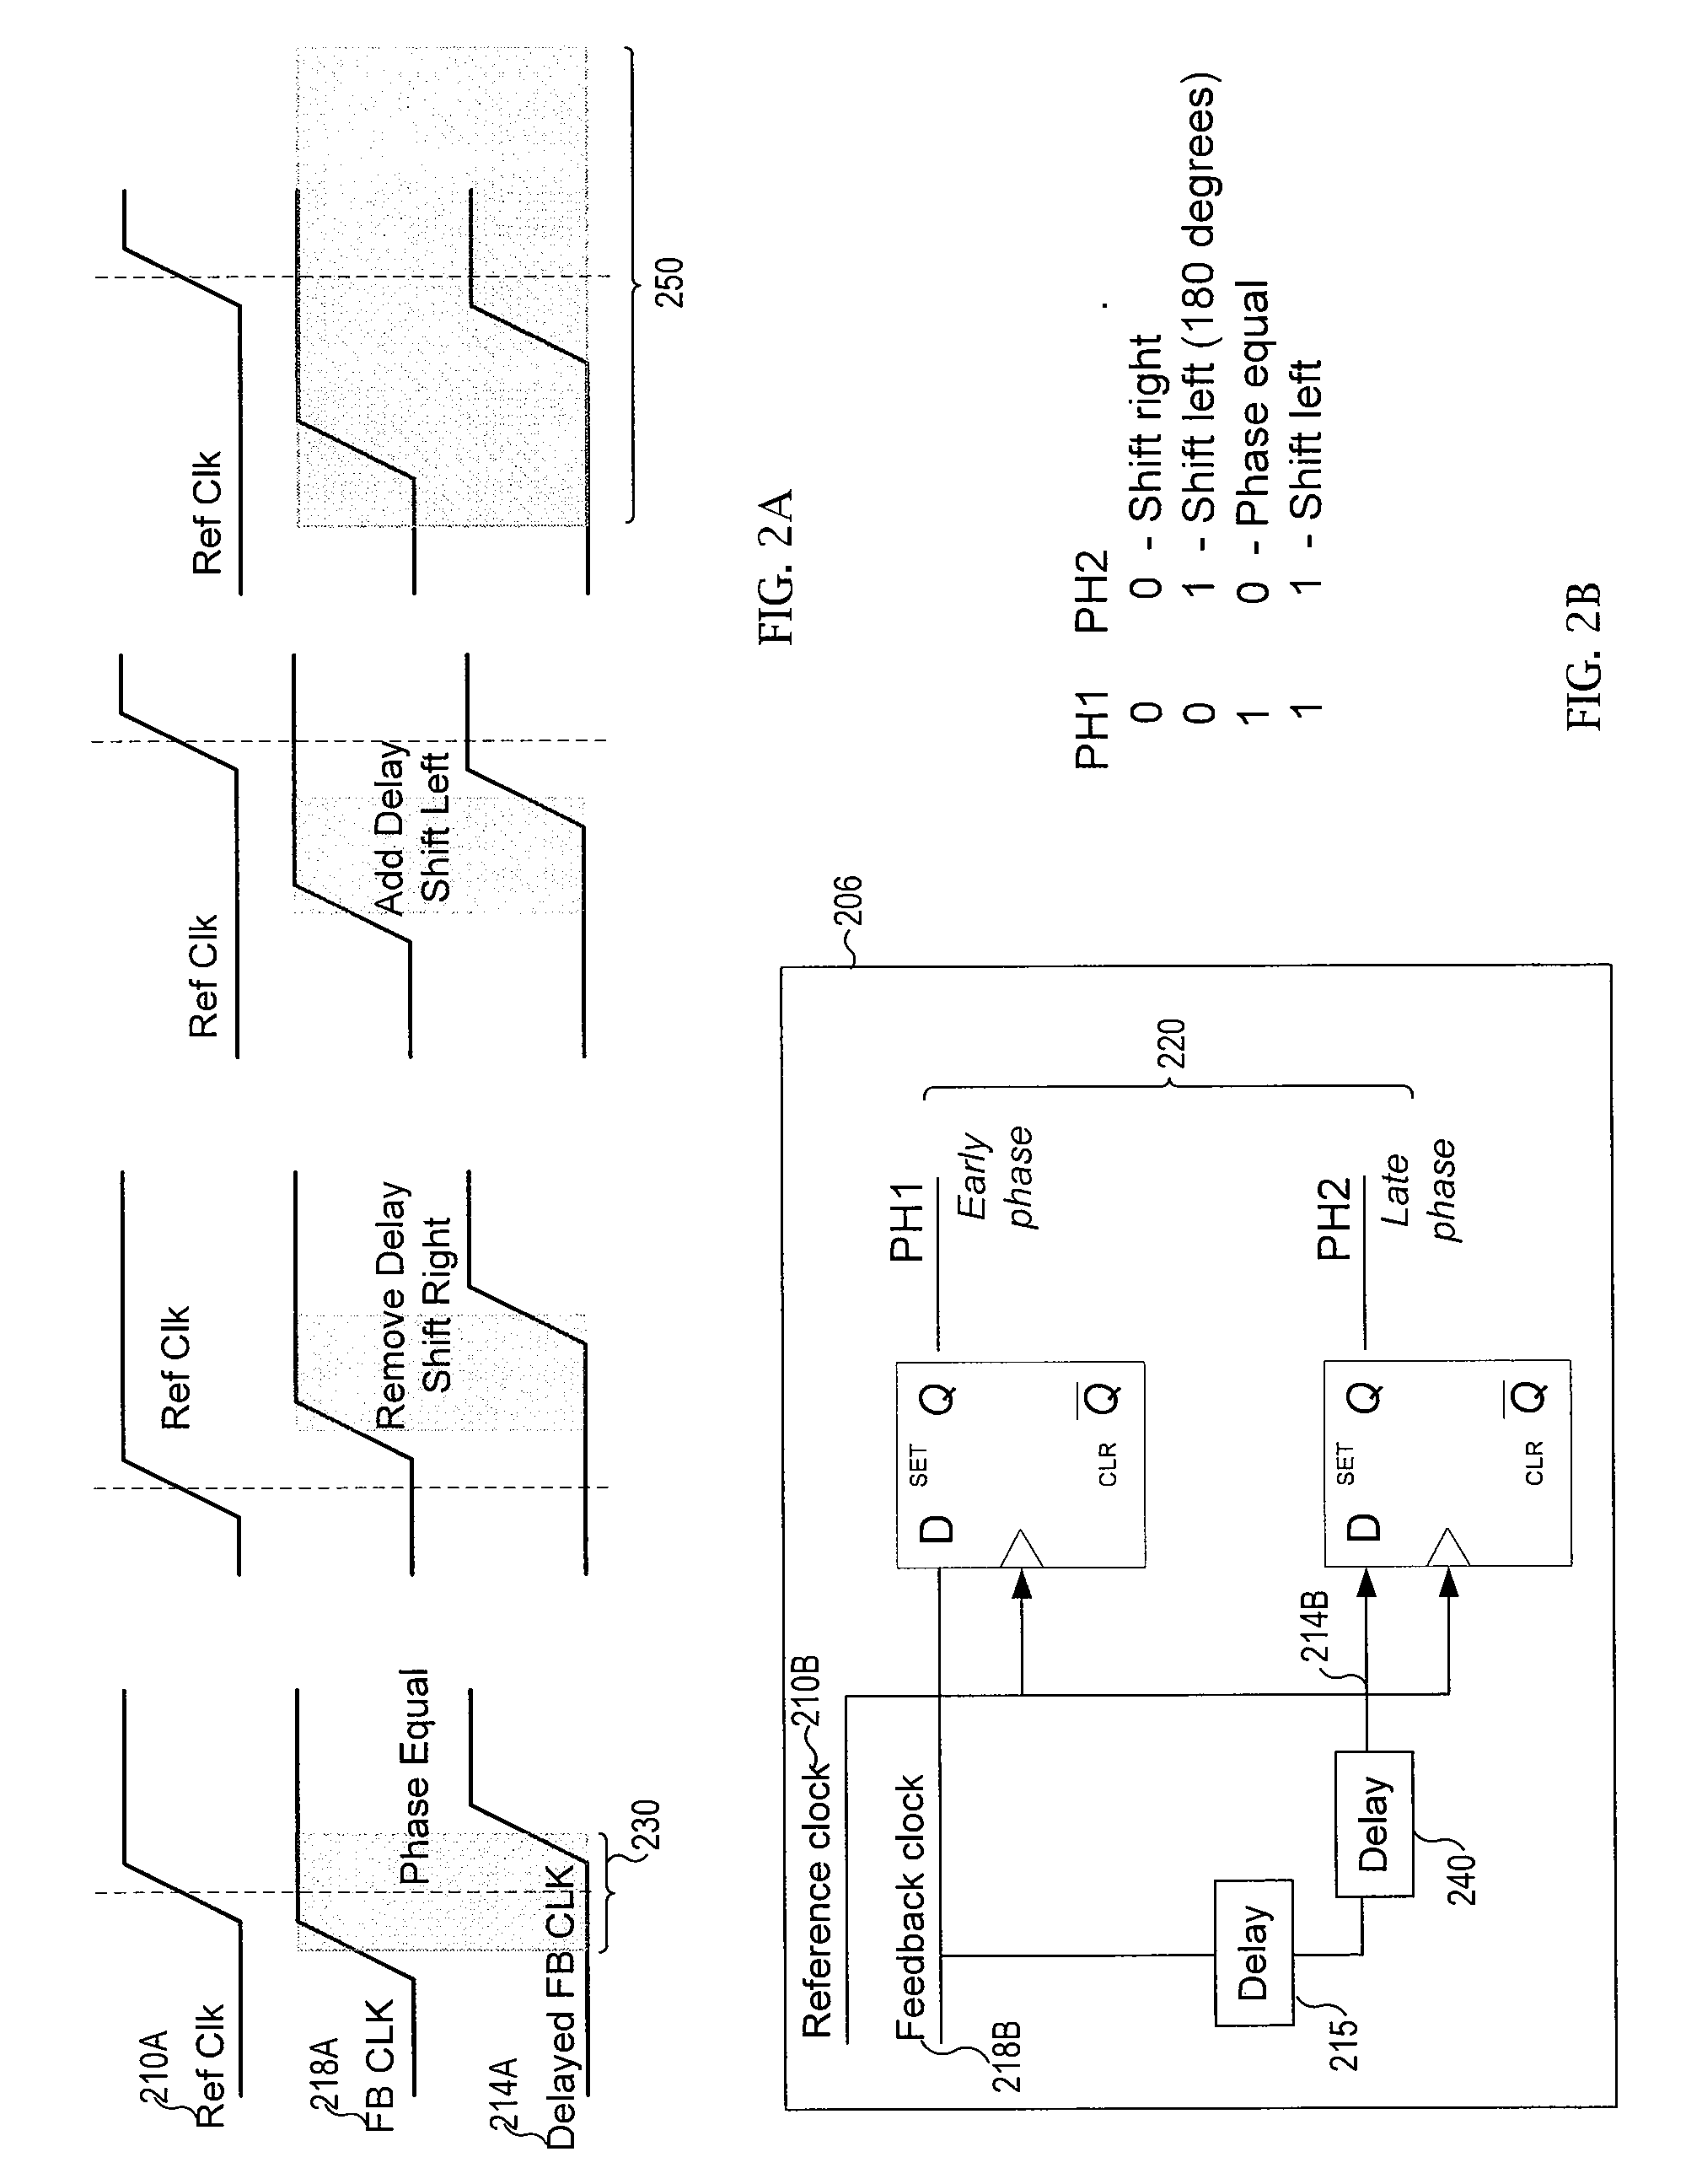 Locked-loop quiescence apparatus, systems, and methods